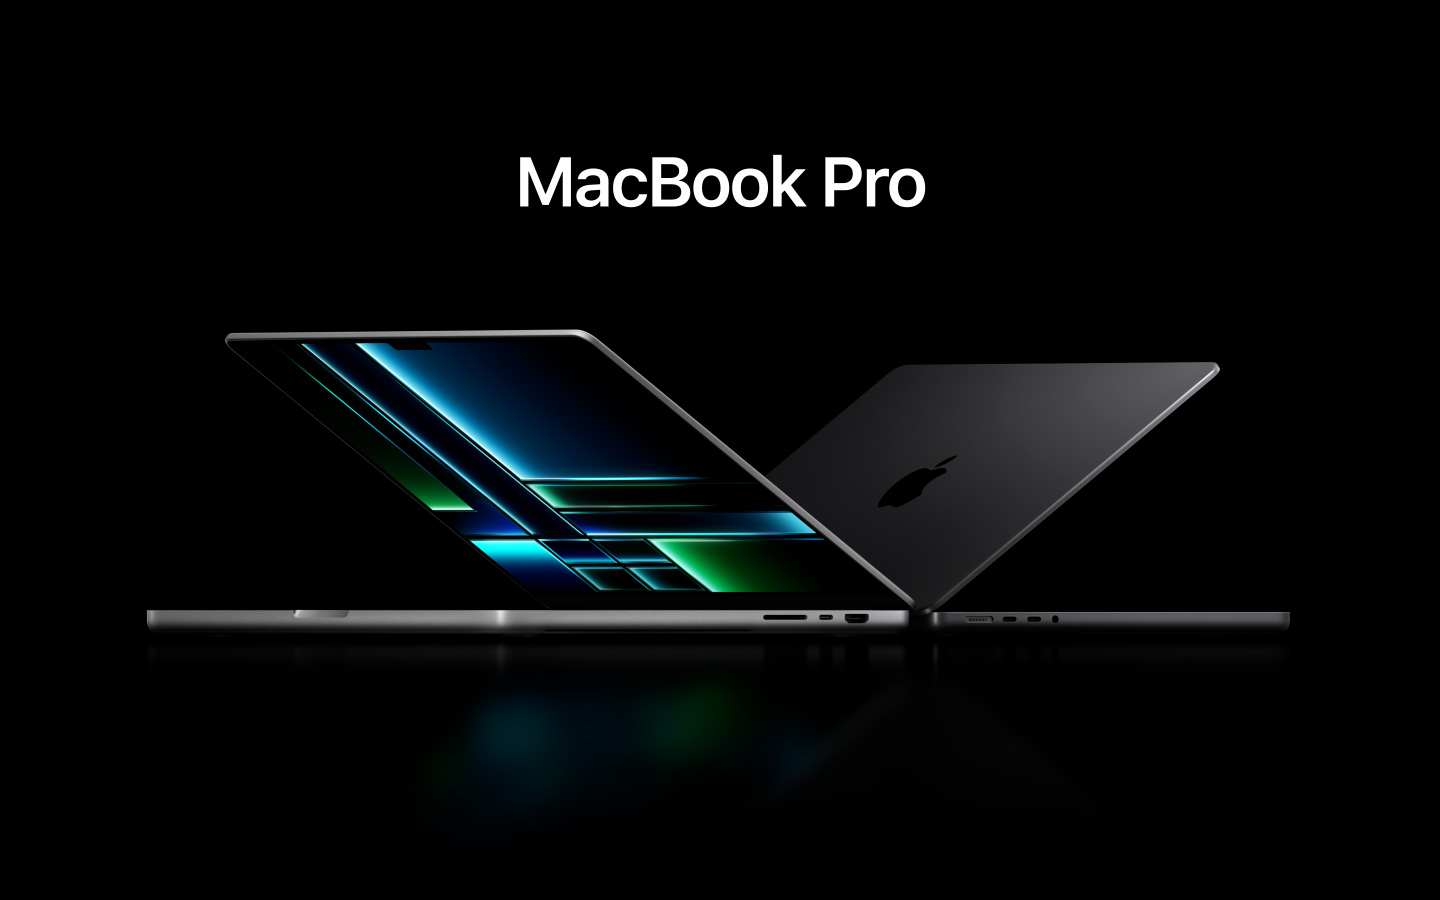 Apple unveiled MacBook Pro with the latest M2 Pro and M2 Max processors starting at $1999